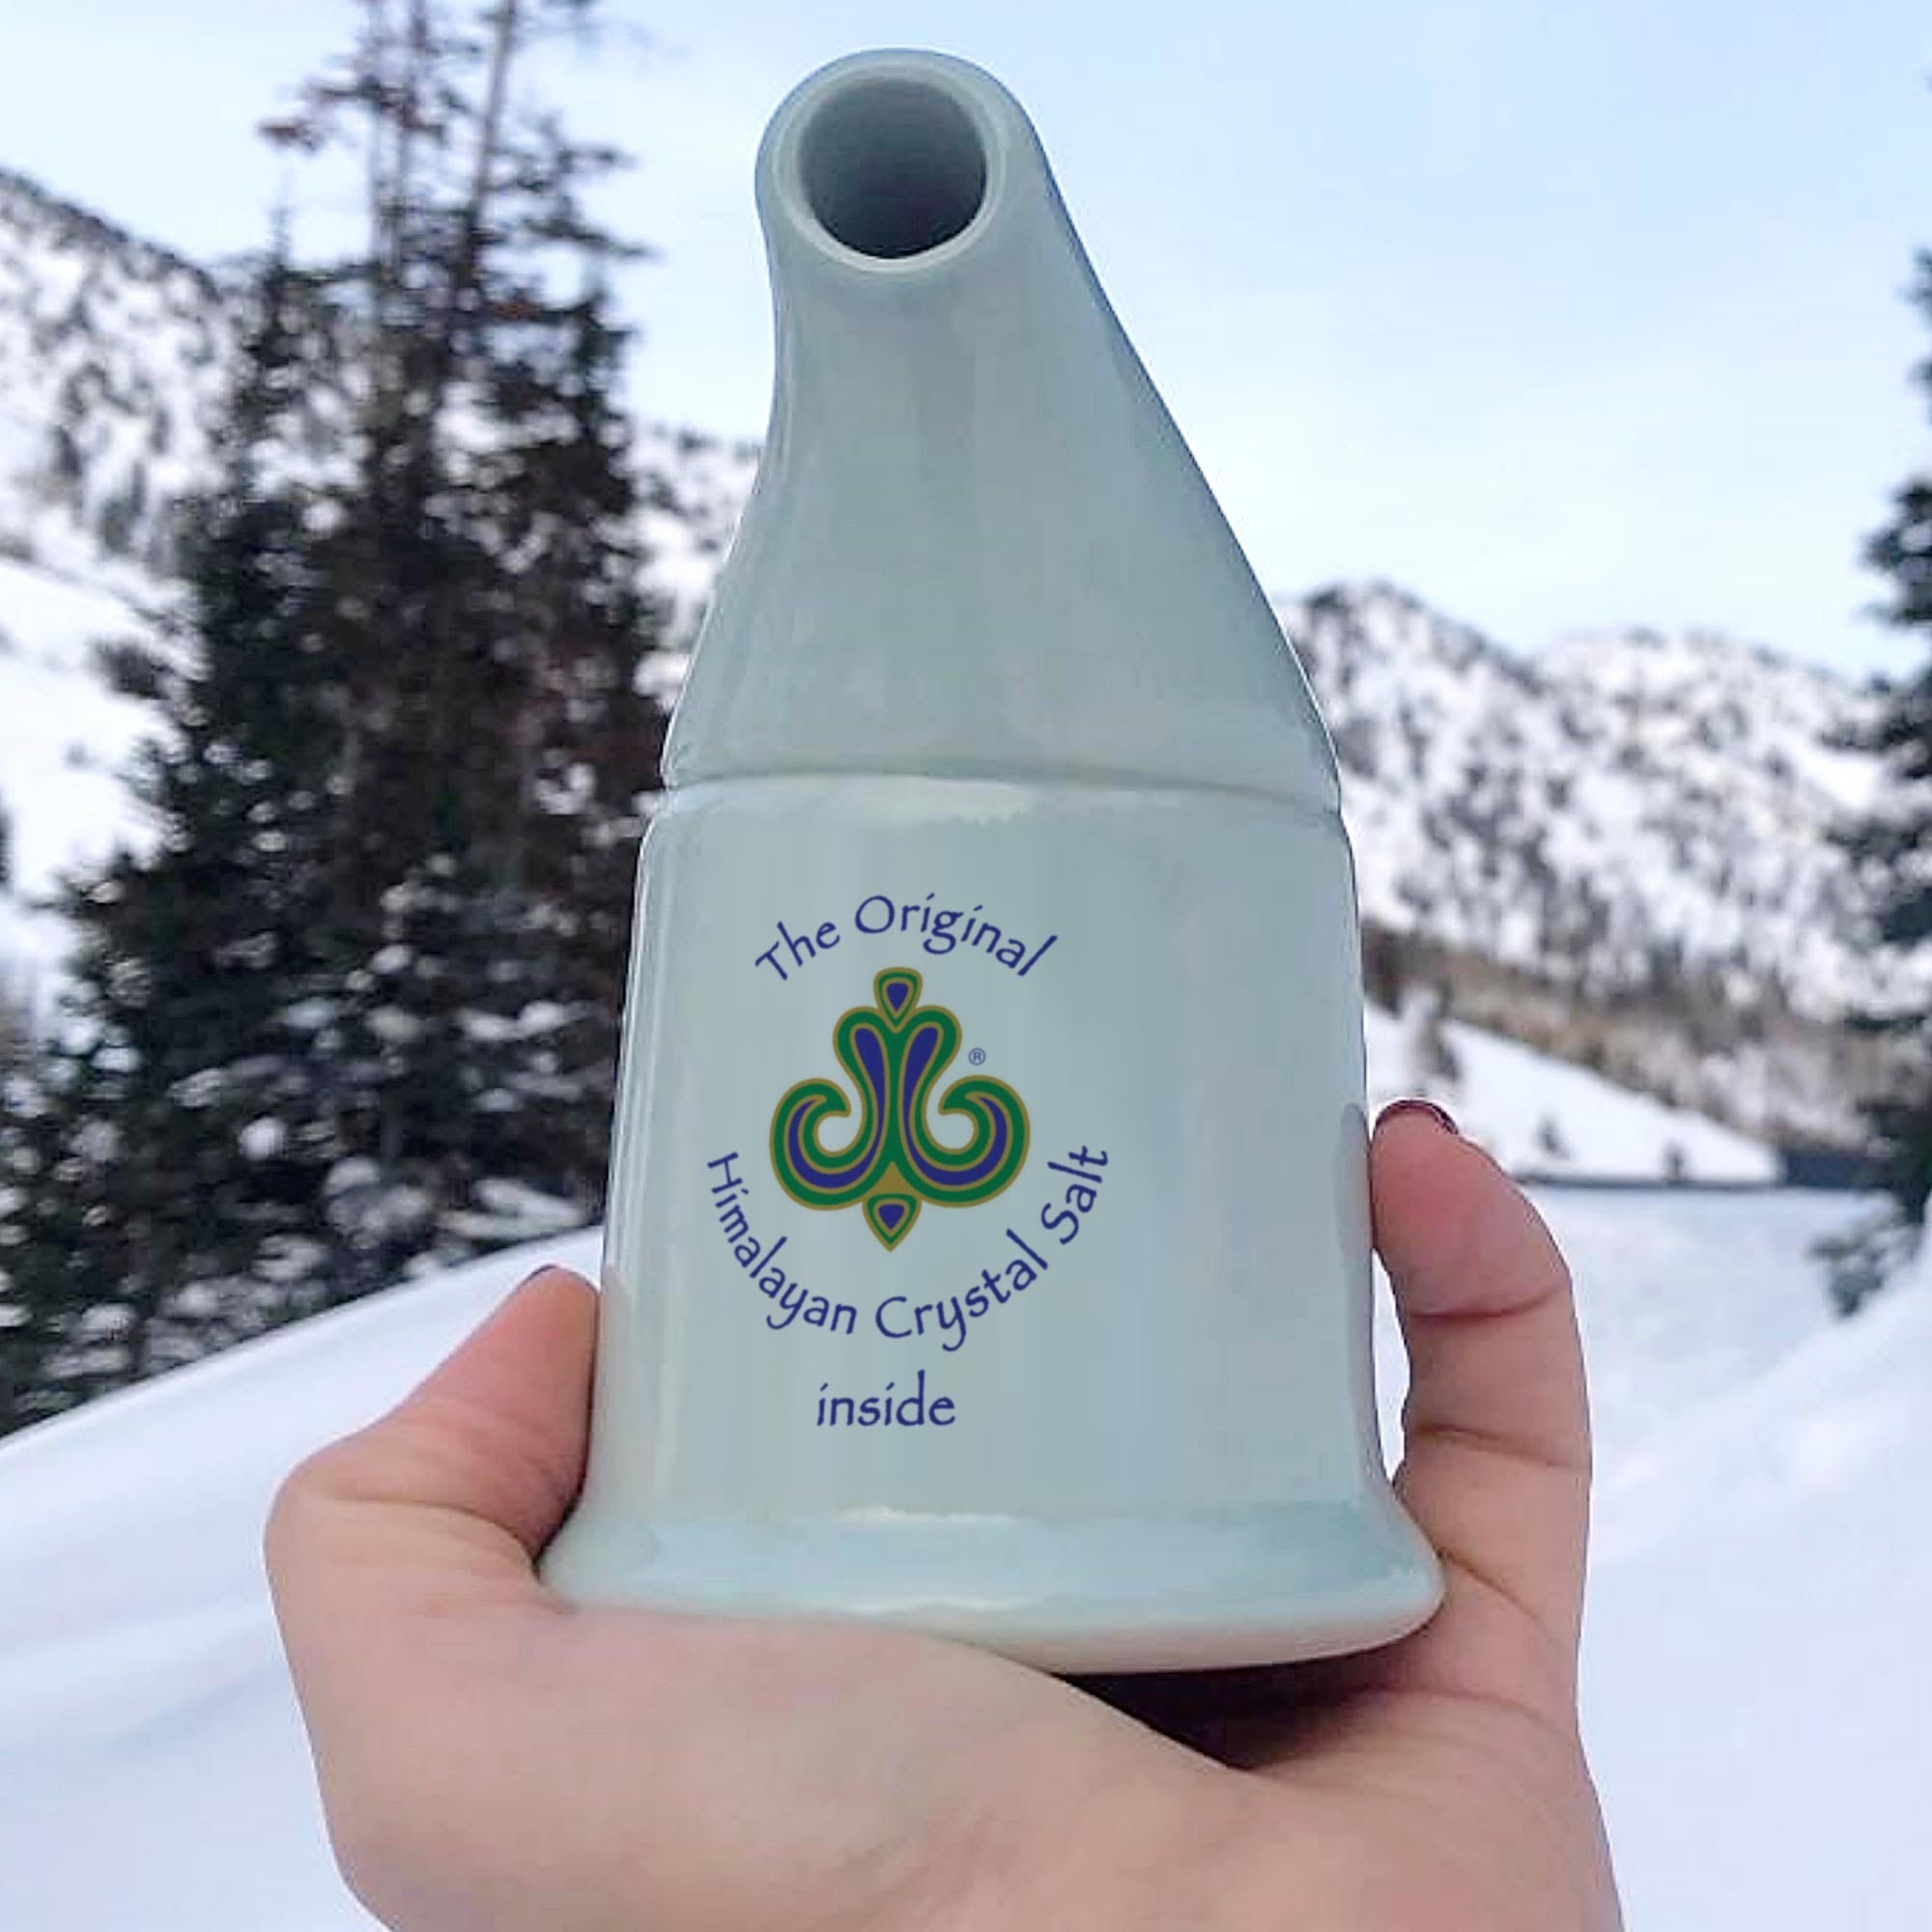 Inhaler + Neti Pot off-white ceramic inhaler in white hand, with snow, trees and mountains in background